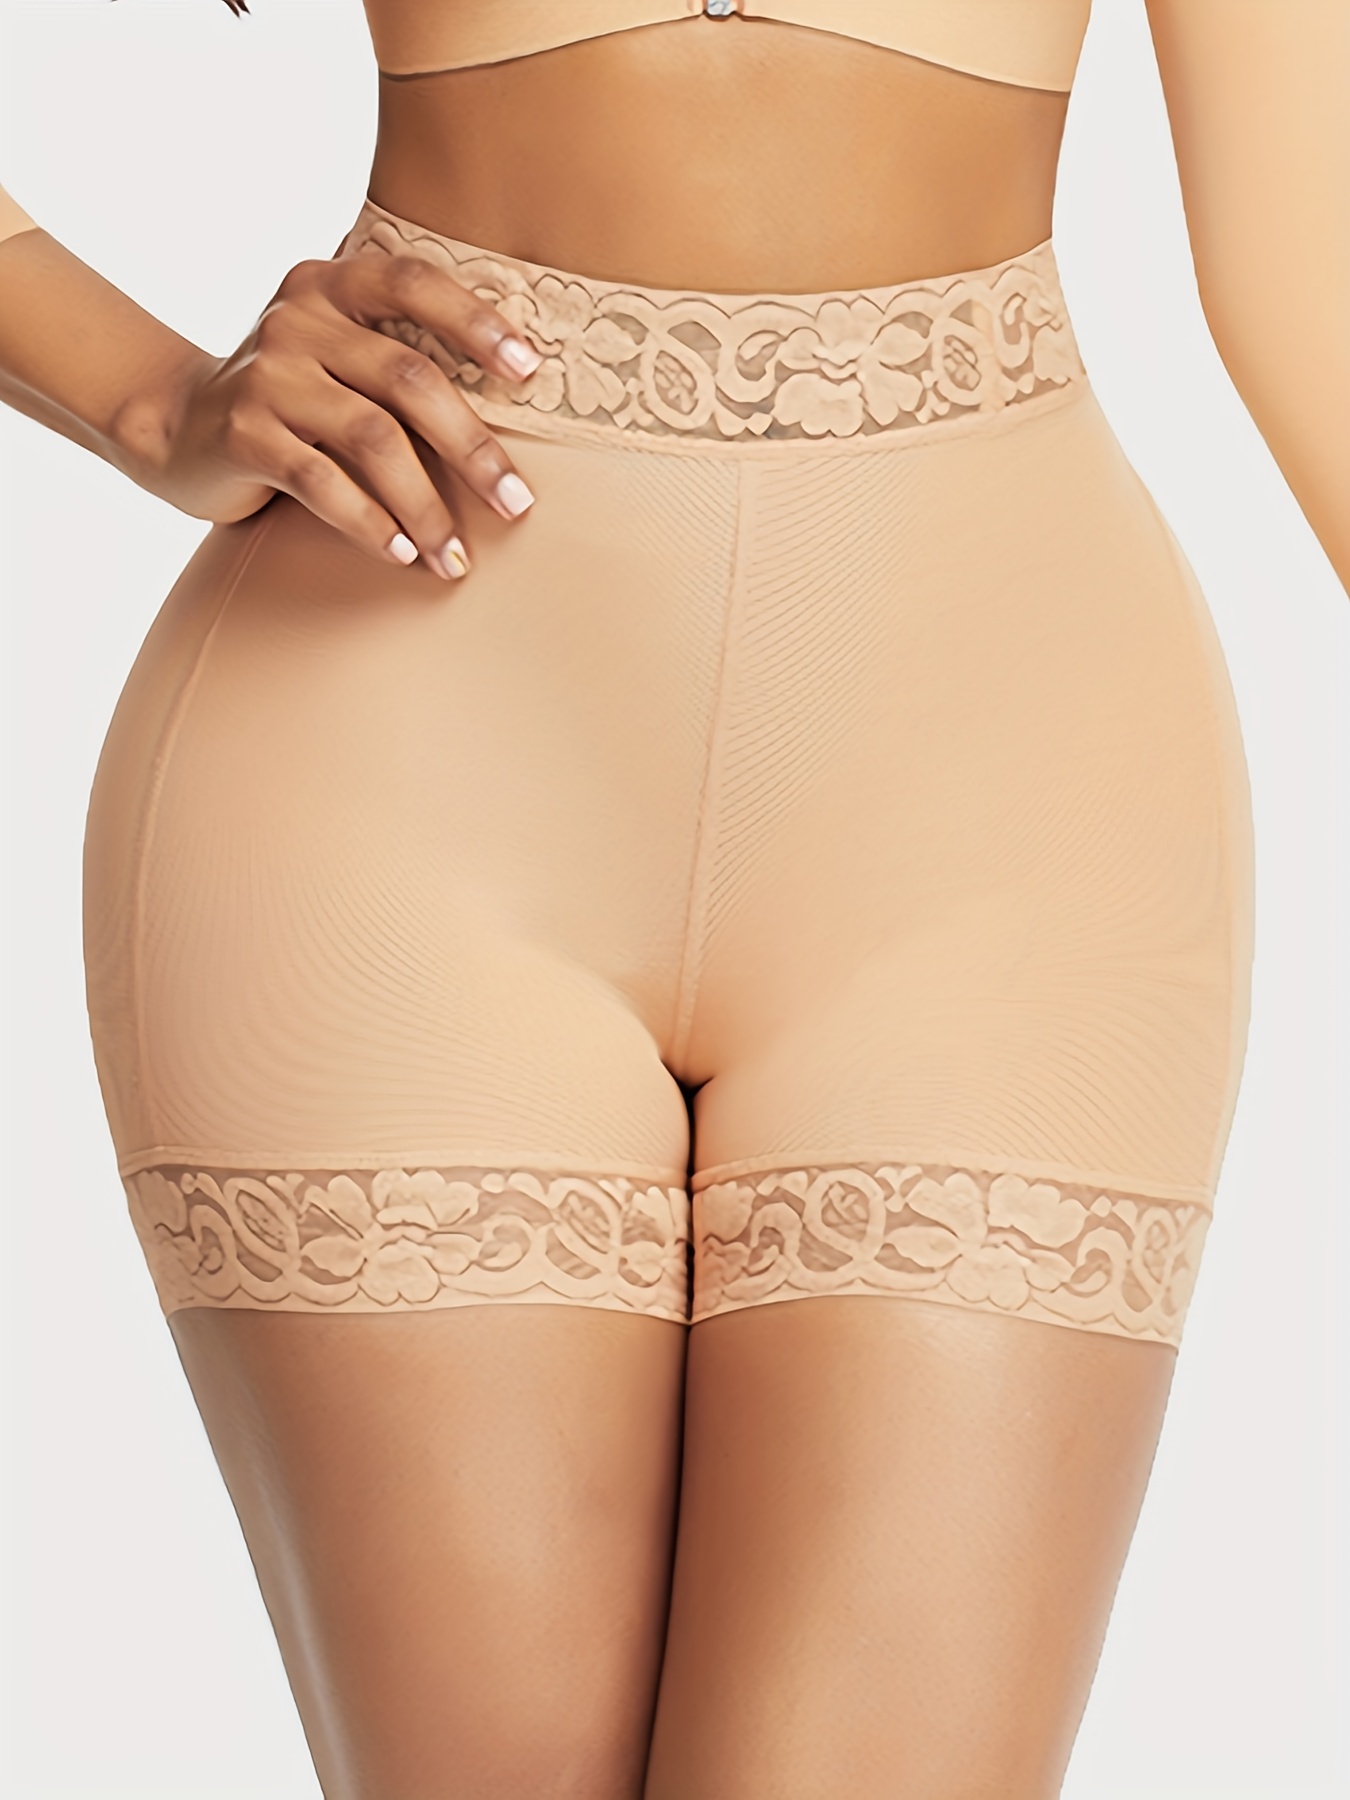 Seamless Silky High Waist Slimming Tummy Control Knickers Pants